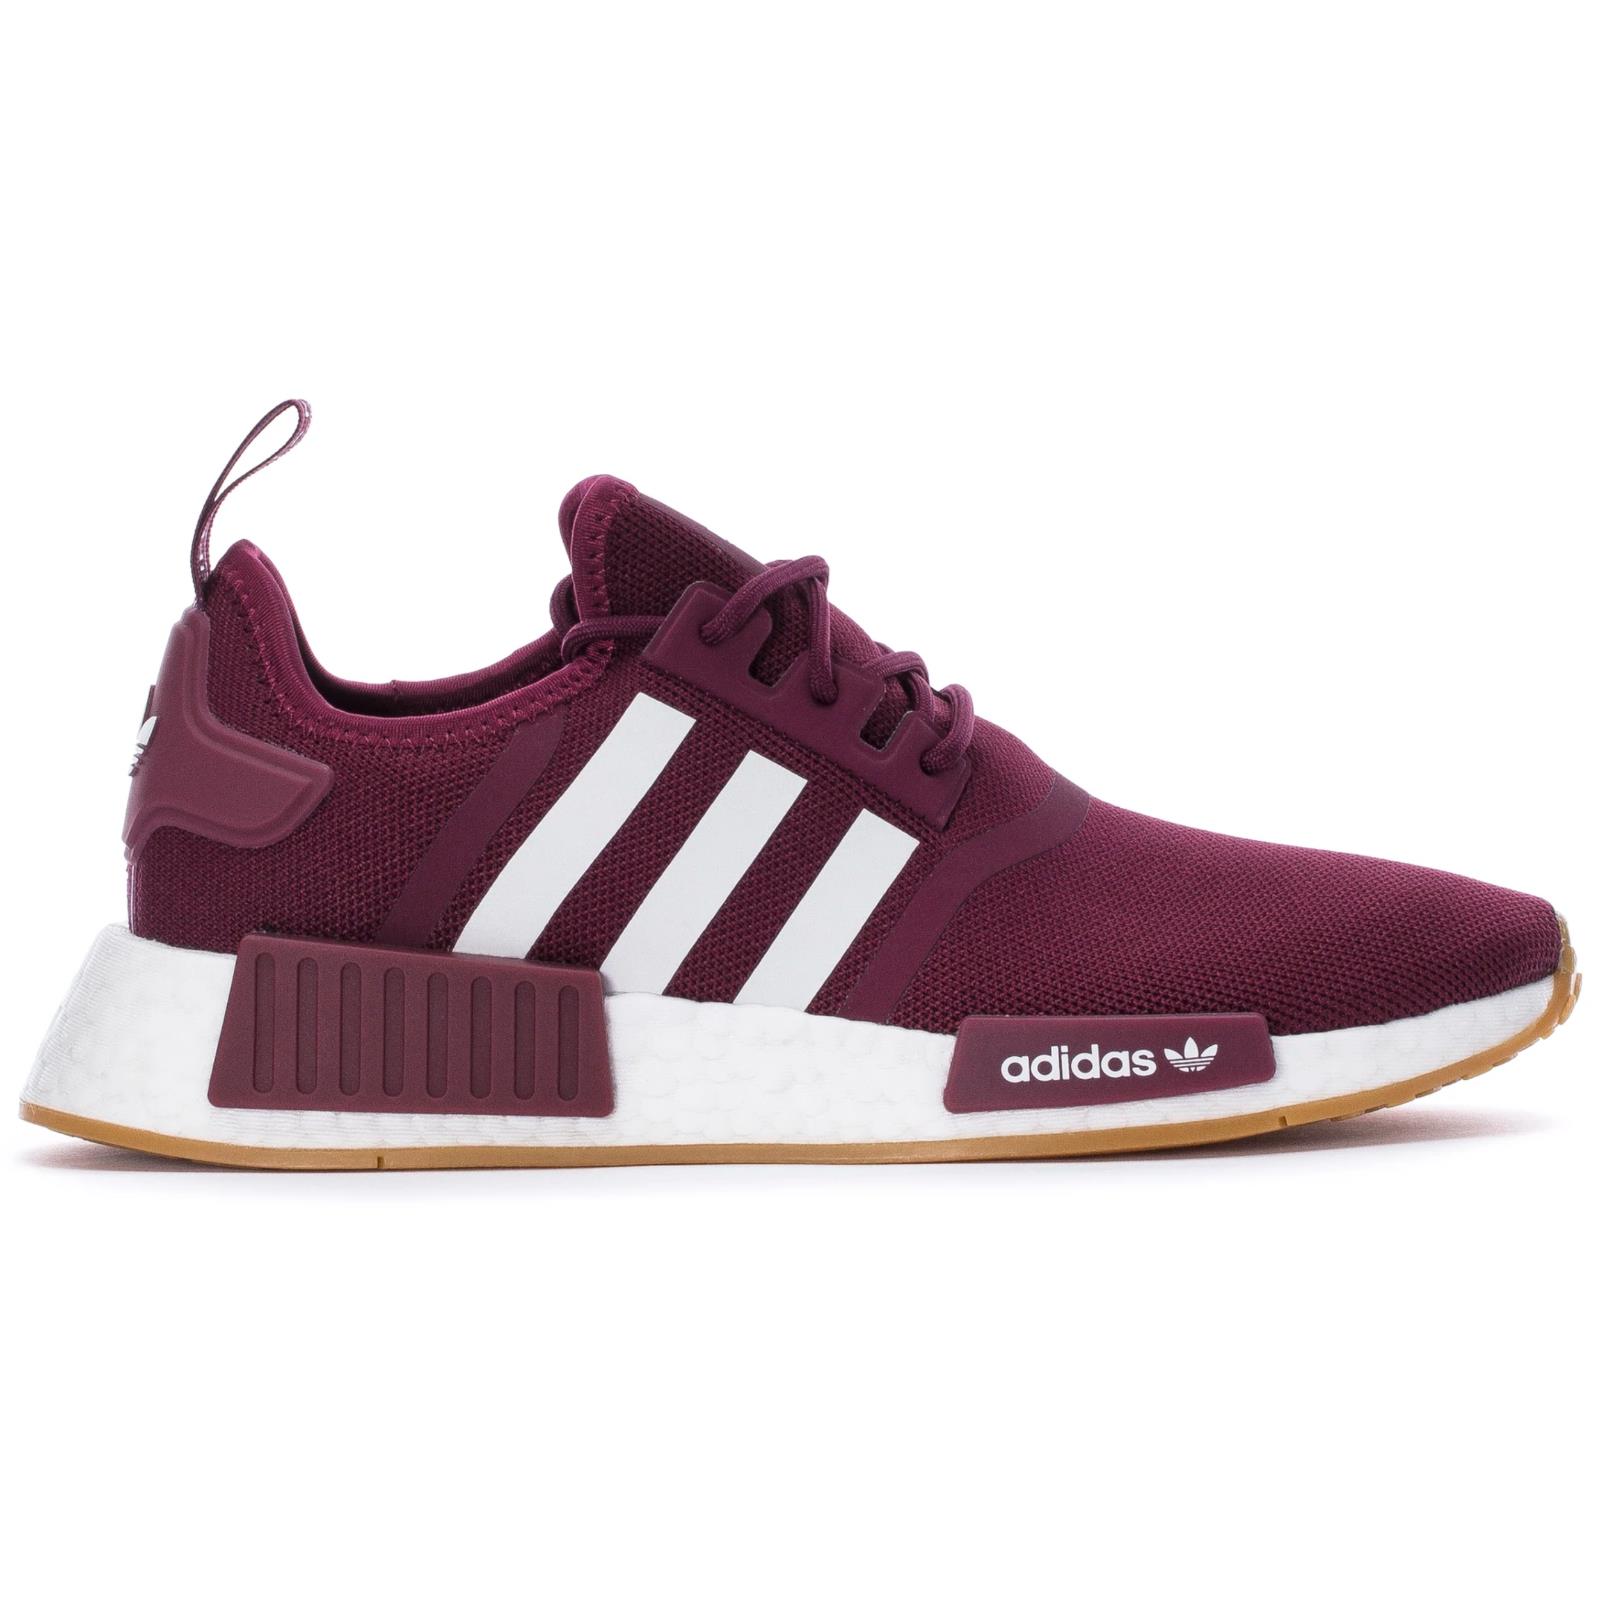 Adidas shoes NMD - Red 0